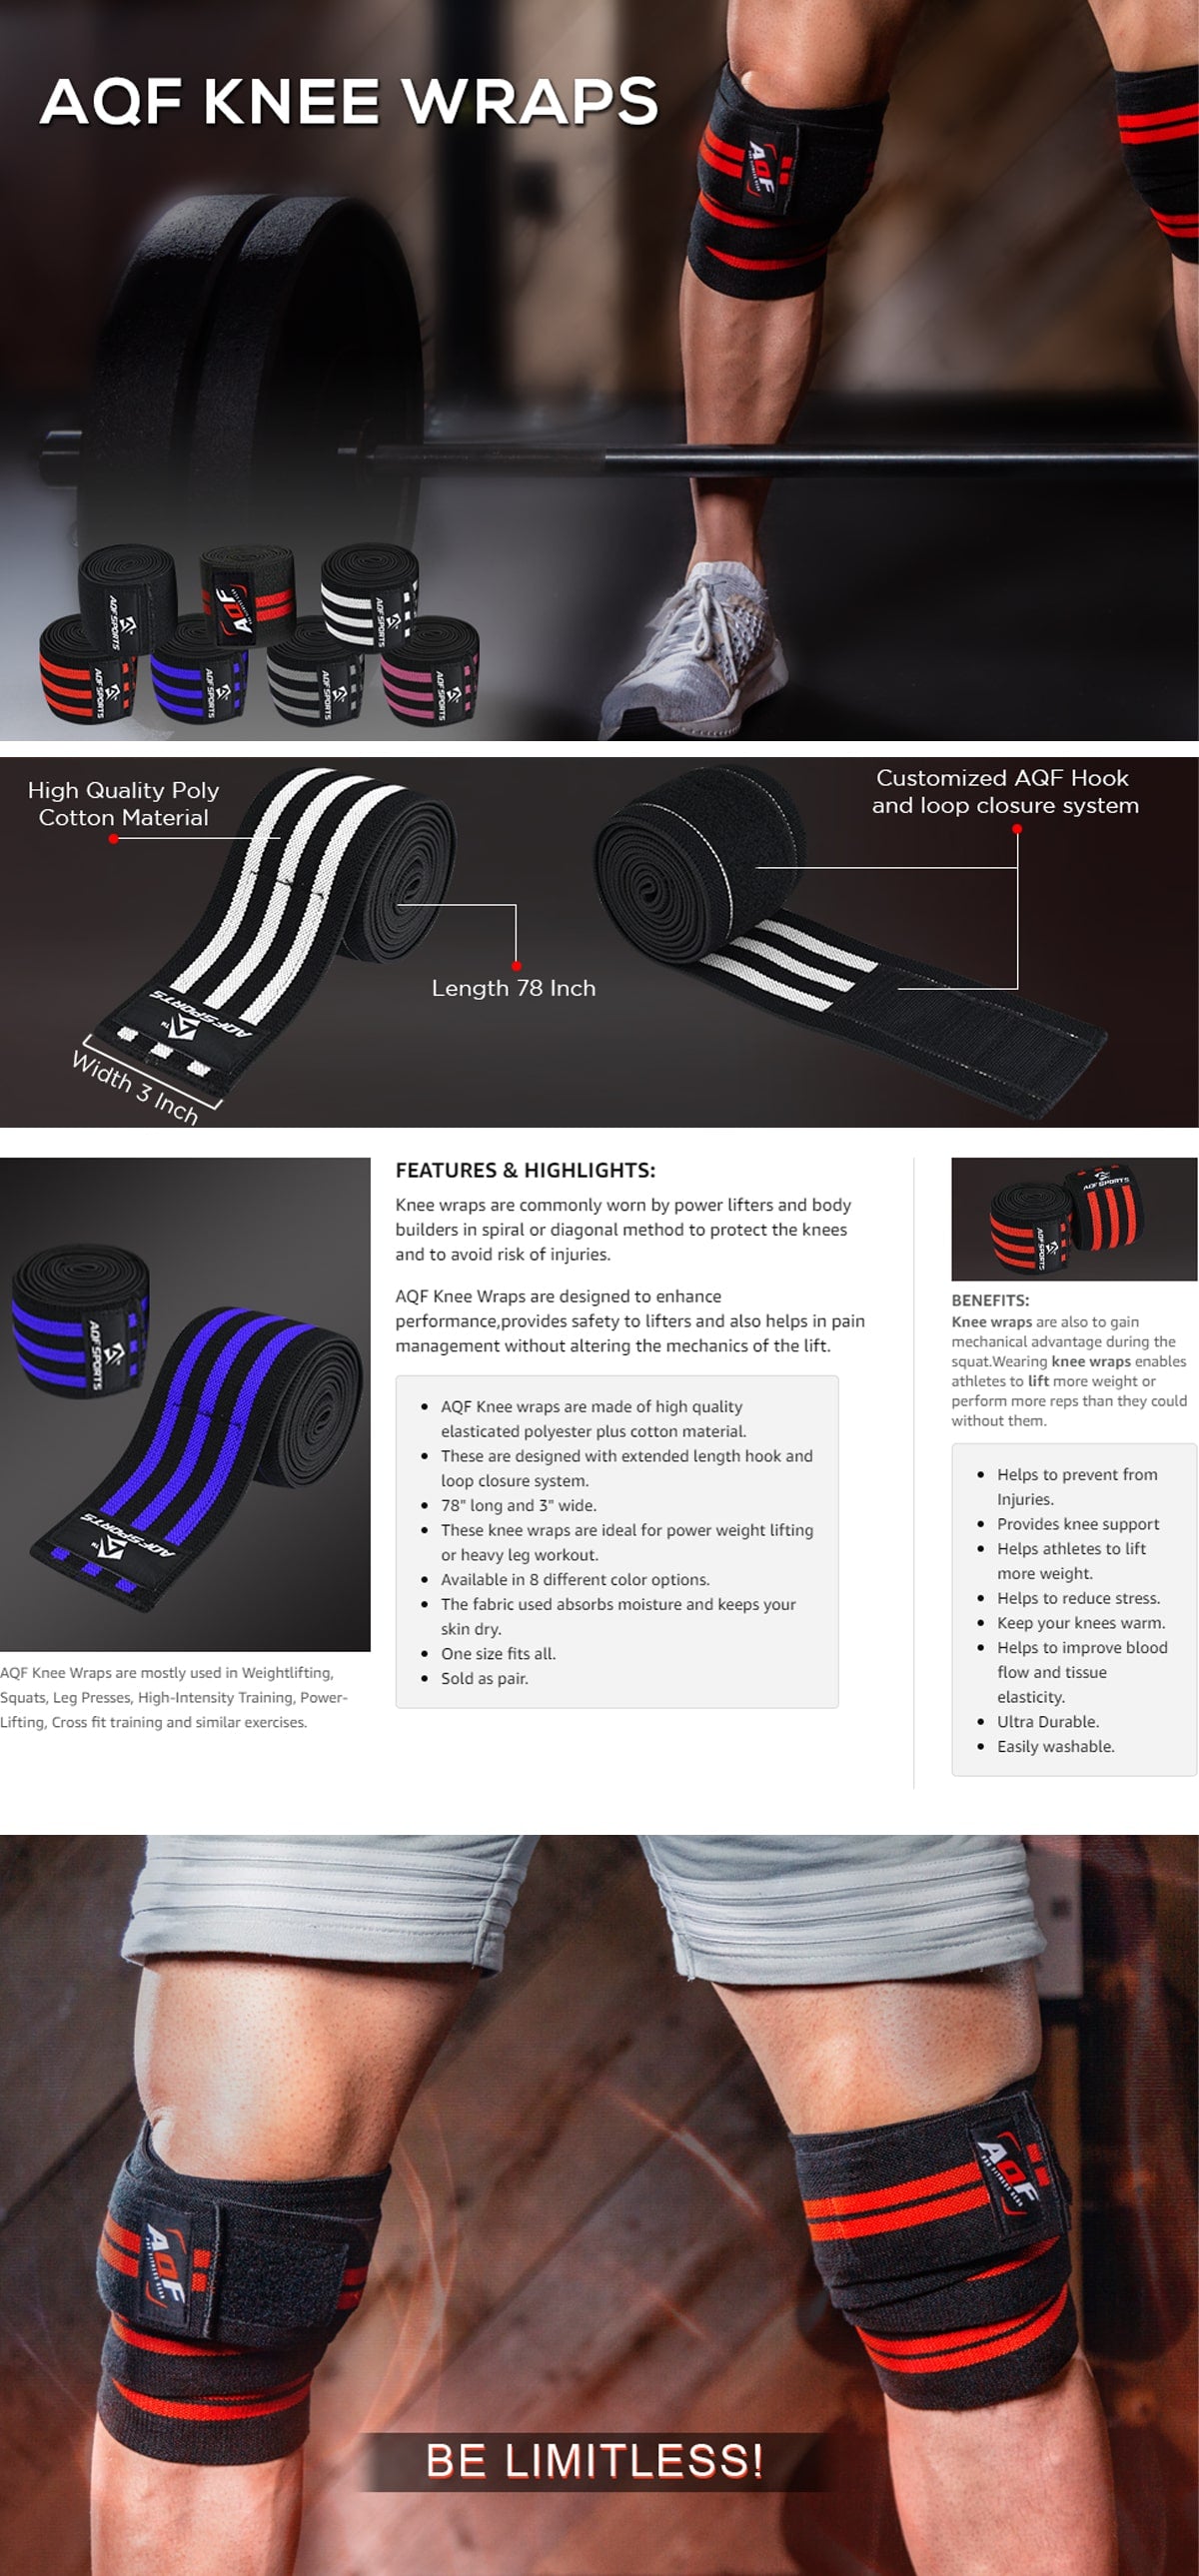 Features of AQF Knee Wrap